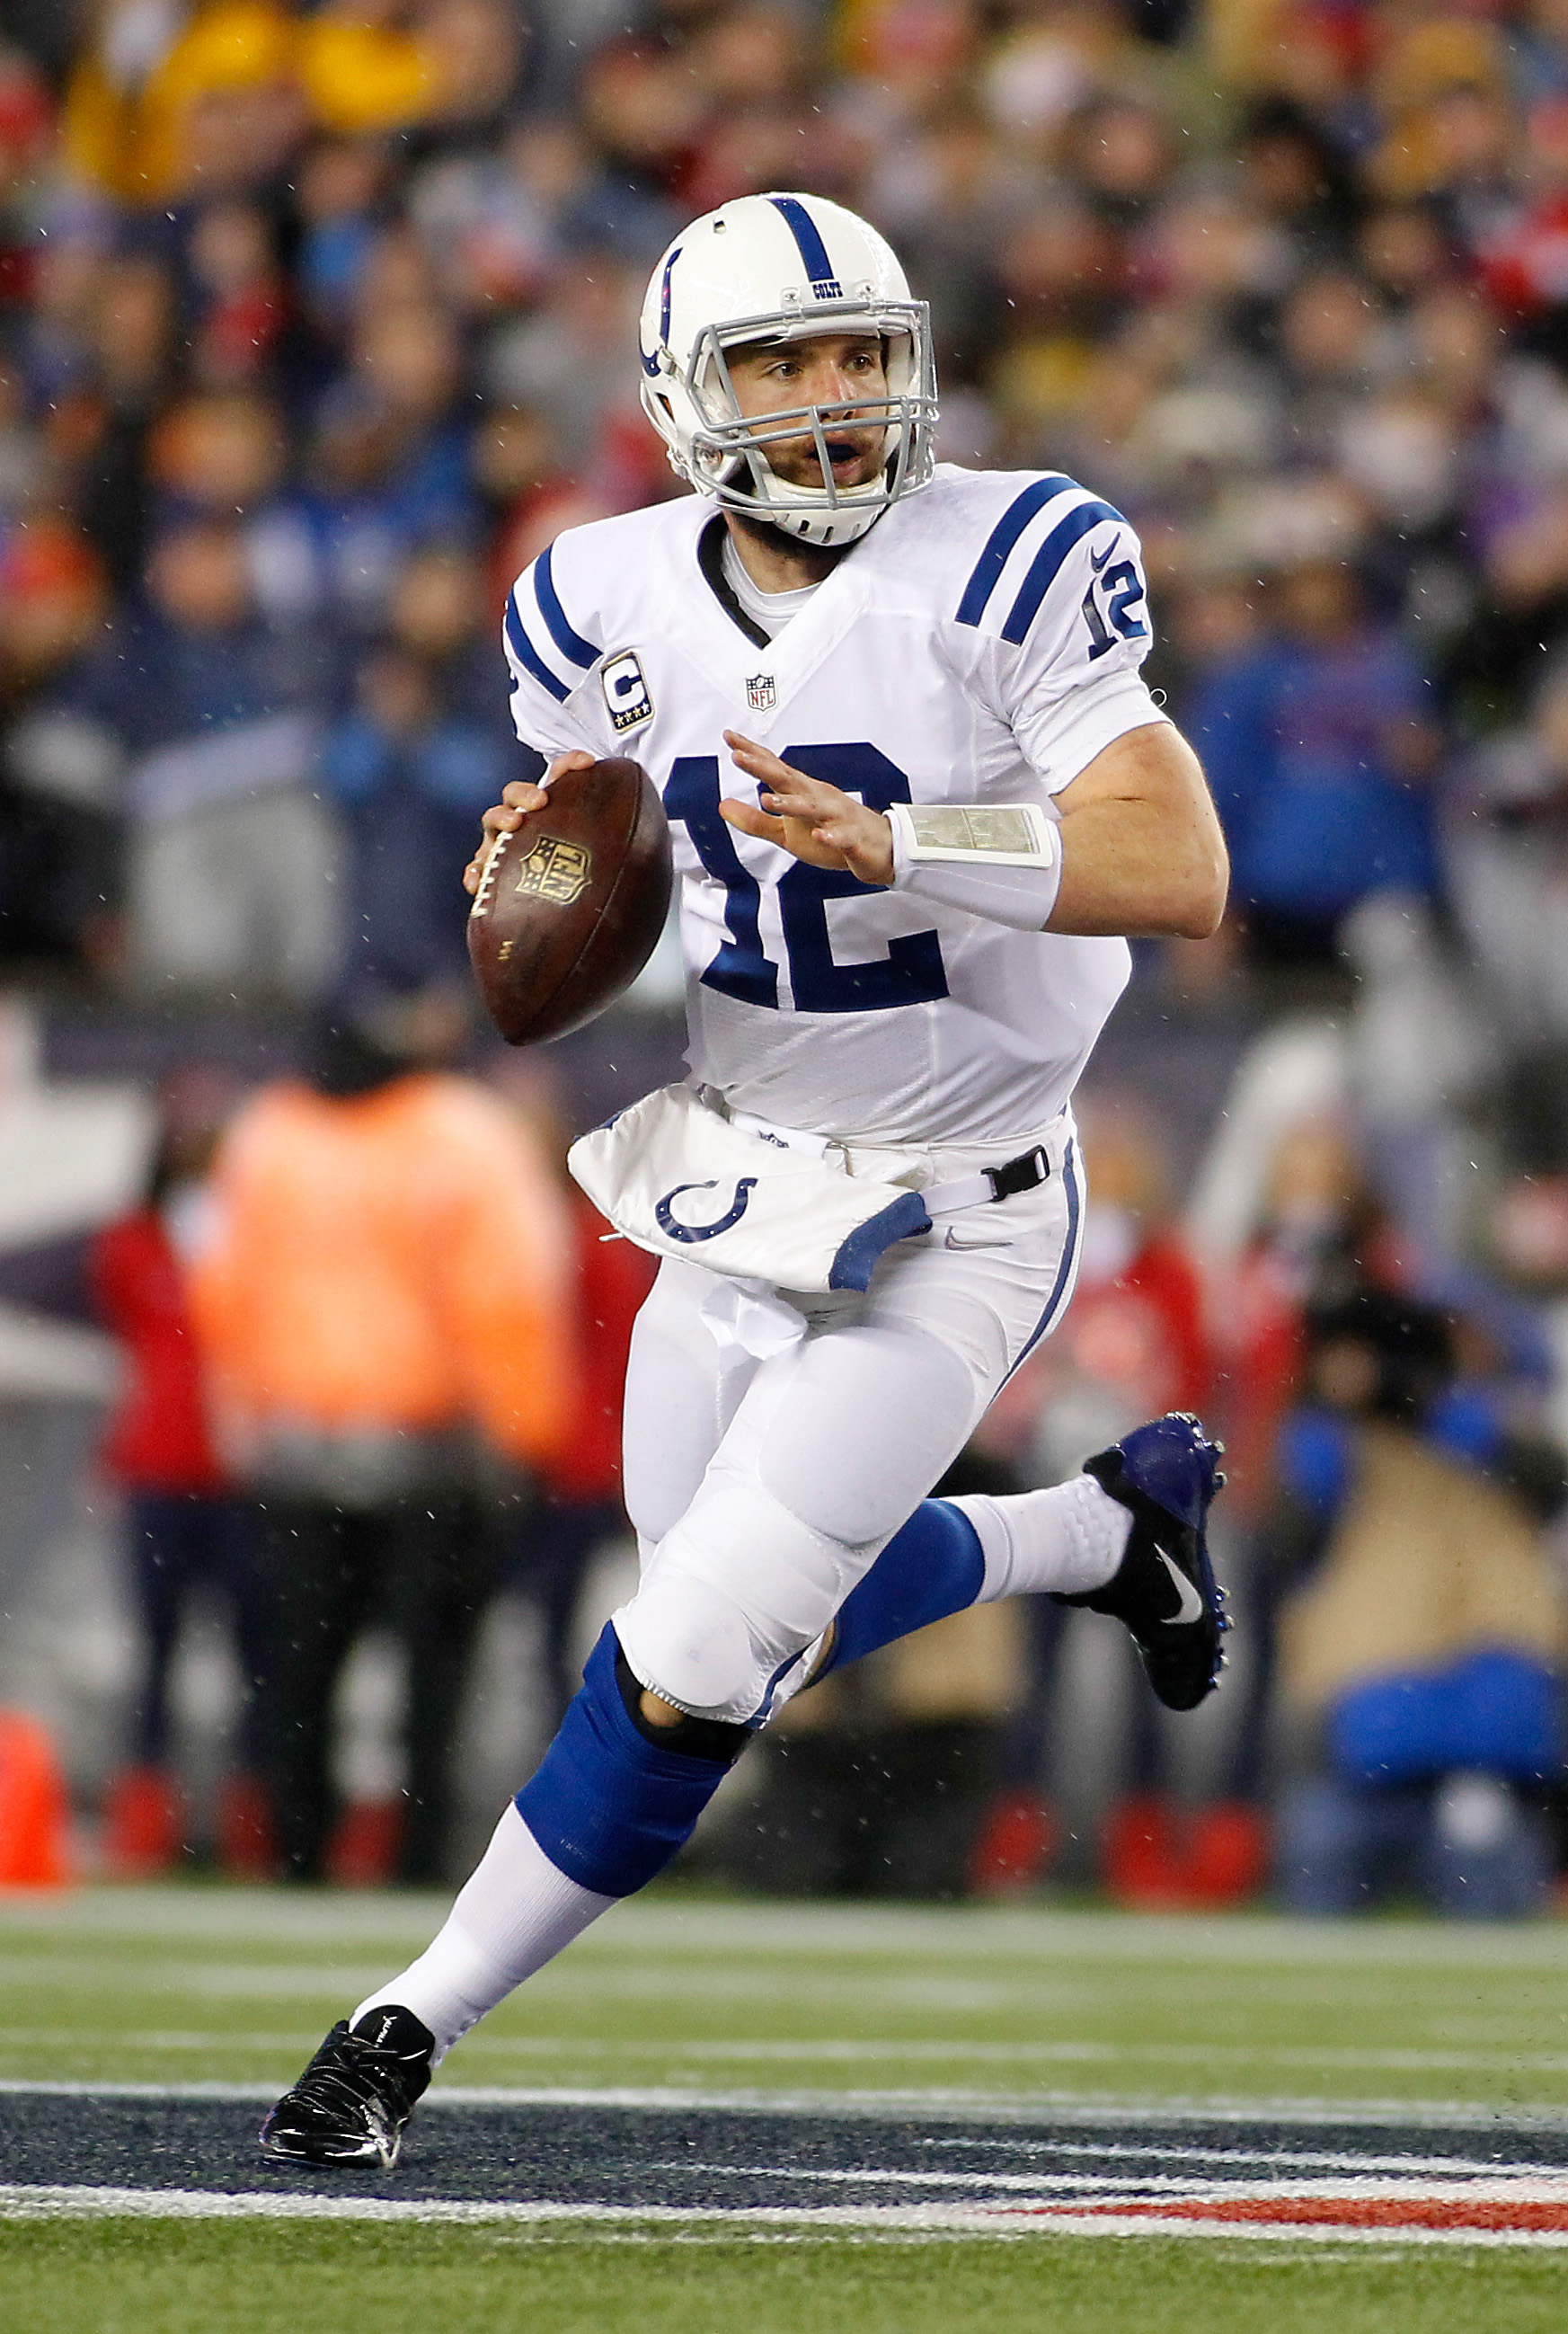 Colts Considered IR To Delay Andrew Luck's Decision